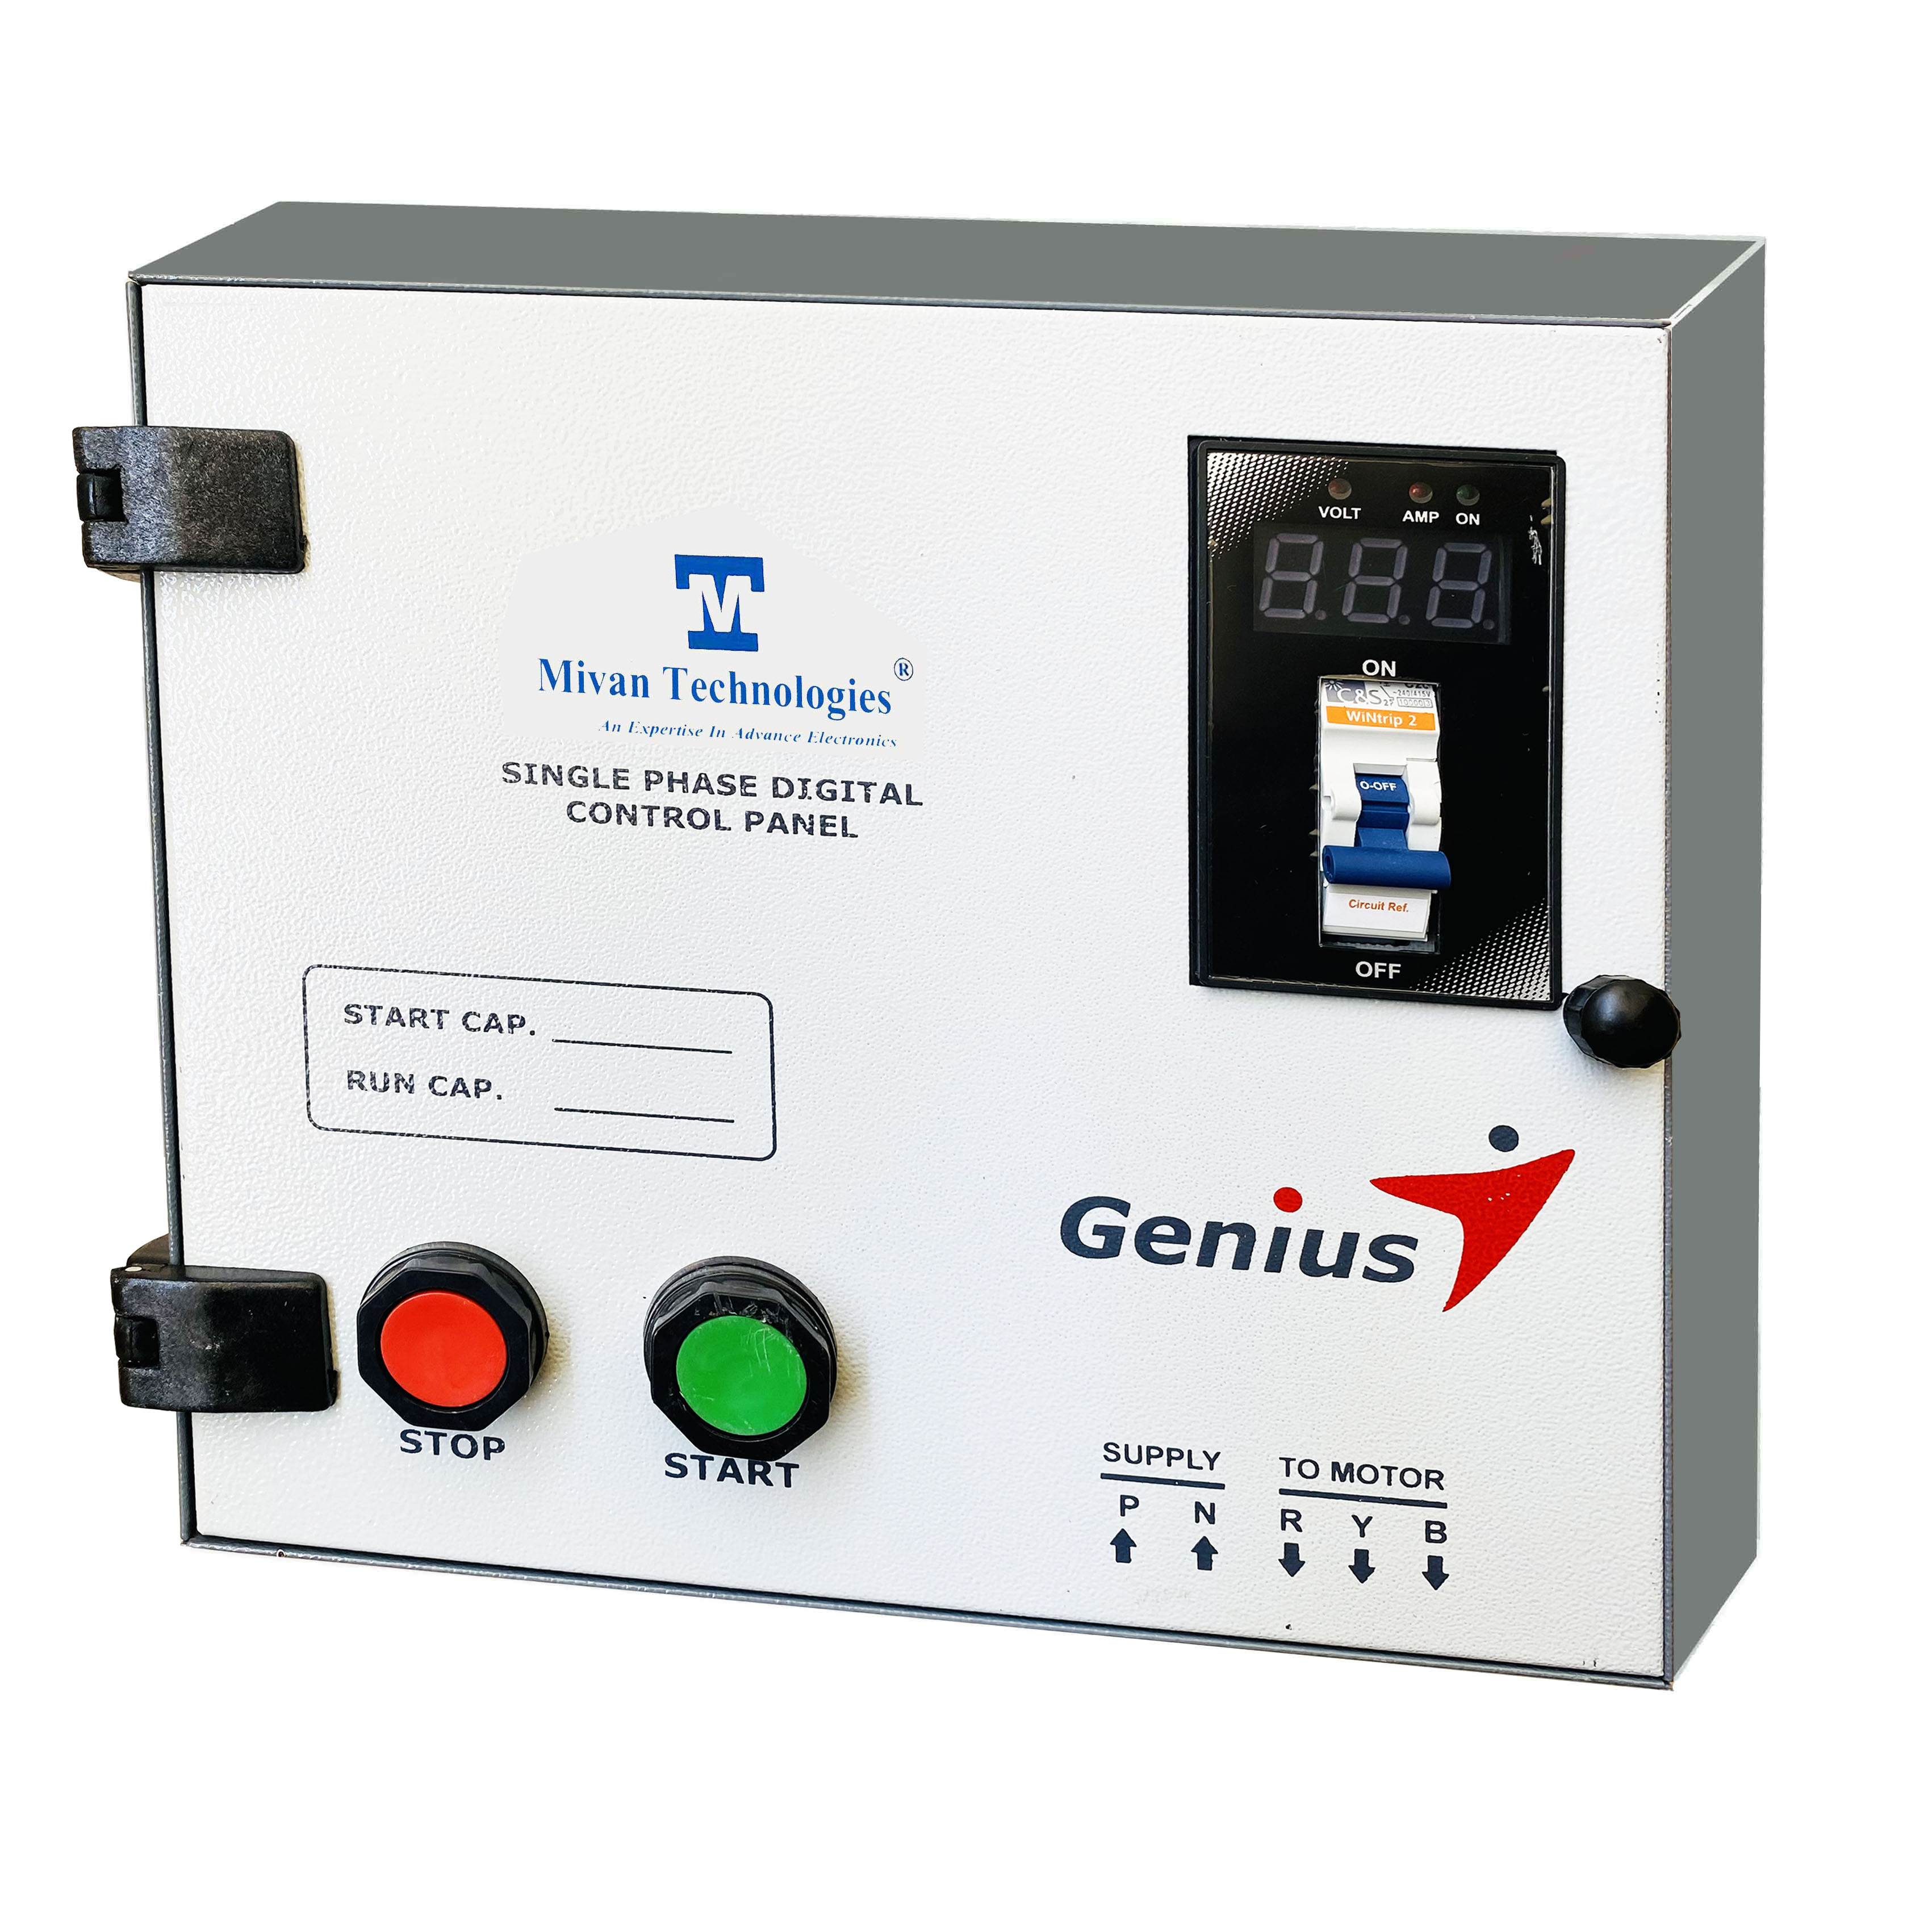 DMPS SR 2 HP Single phase Digital starter with BCH contactor with digital volt and amp meter and MCB start and run capacitor